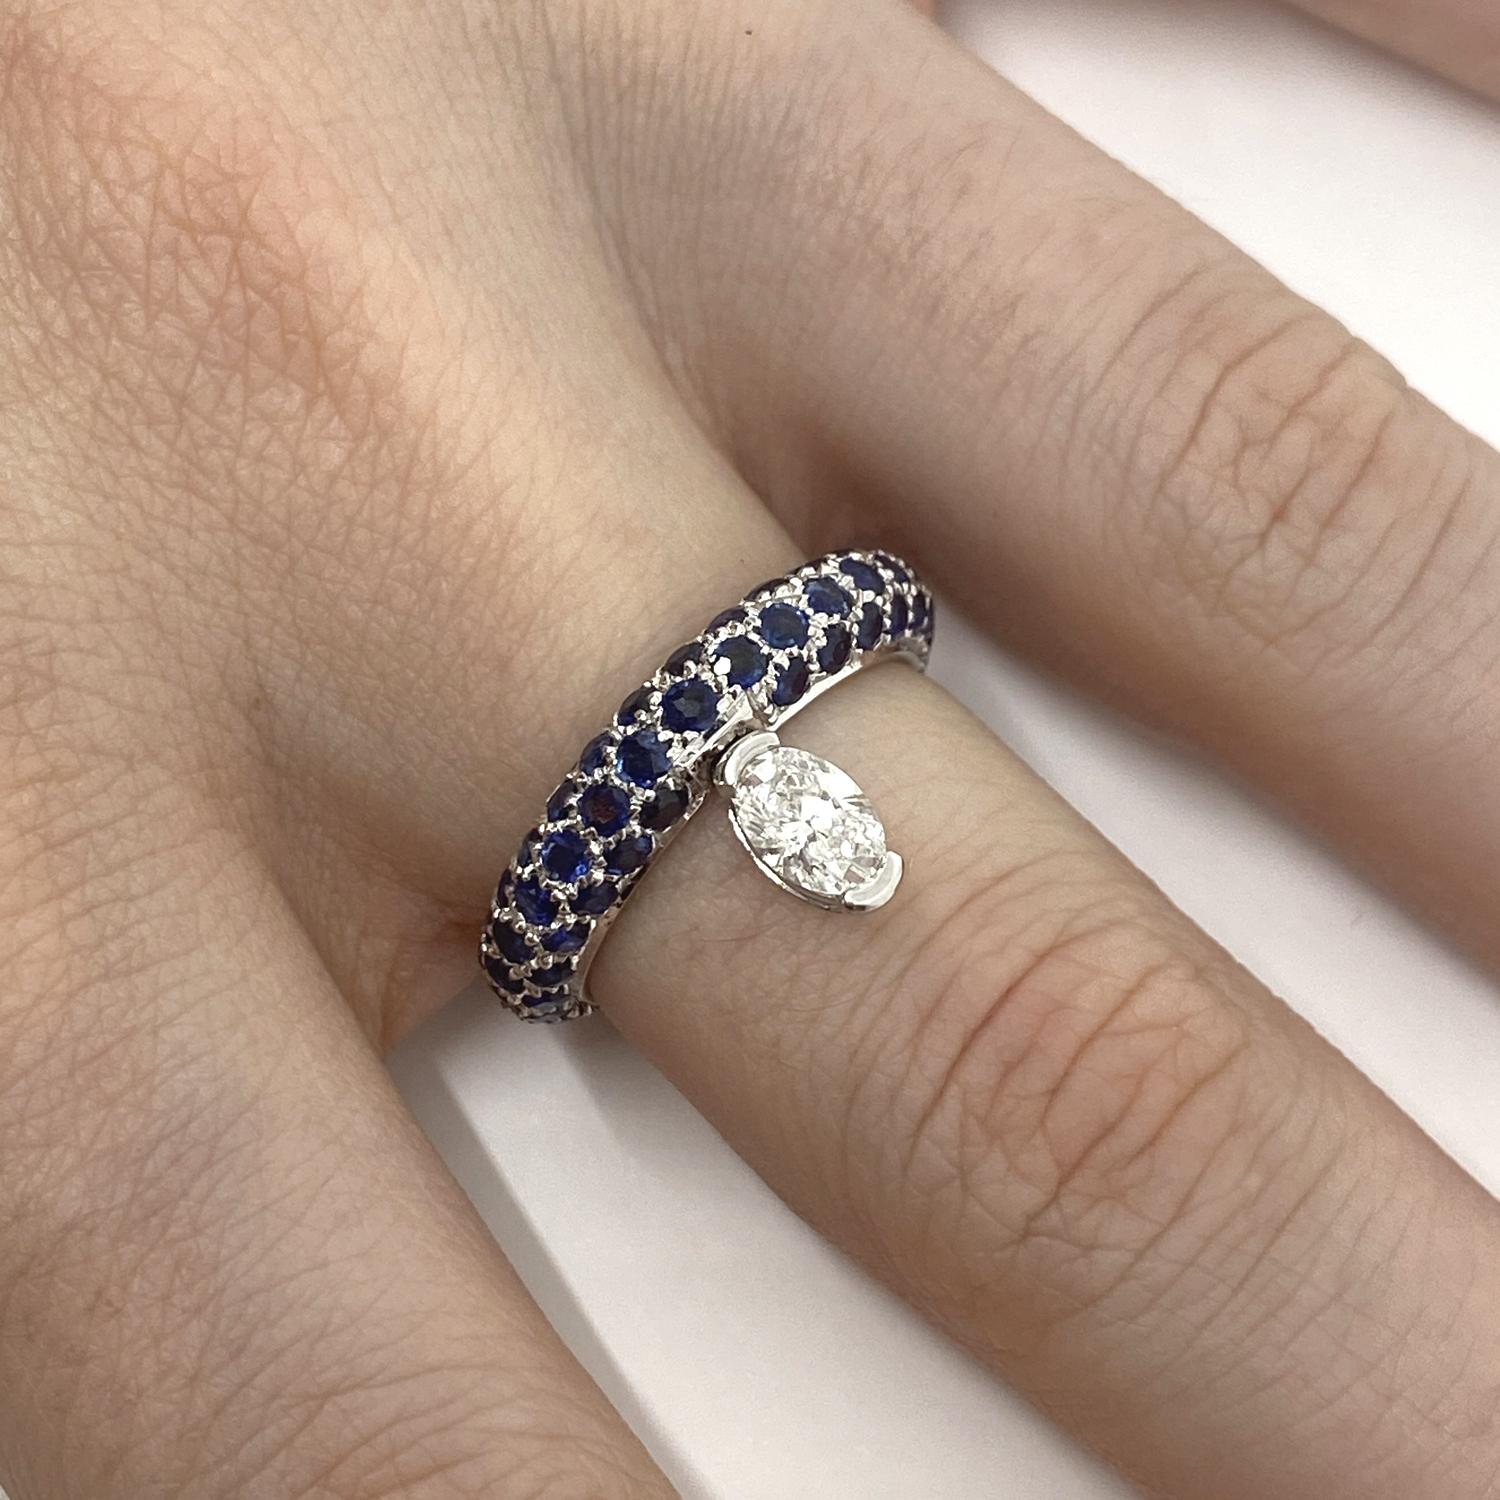 Ring made of 18kt white gold paved with brilliant-cut blue sapphires for ct.2.80 and oval-cut natural diamond for ct.0.43

Welcome to our jewelry collection, where every piece tells a story of timeless elegance and unparalleled craftsmanship. As a